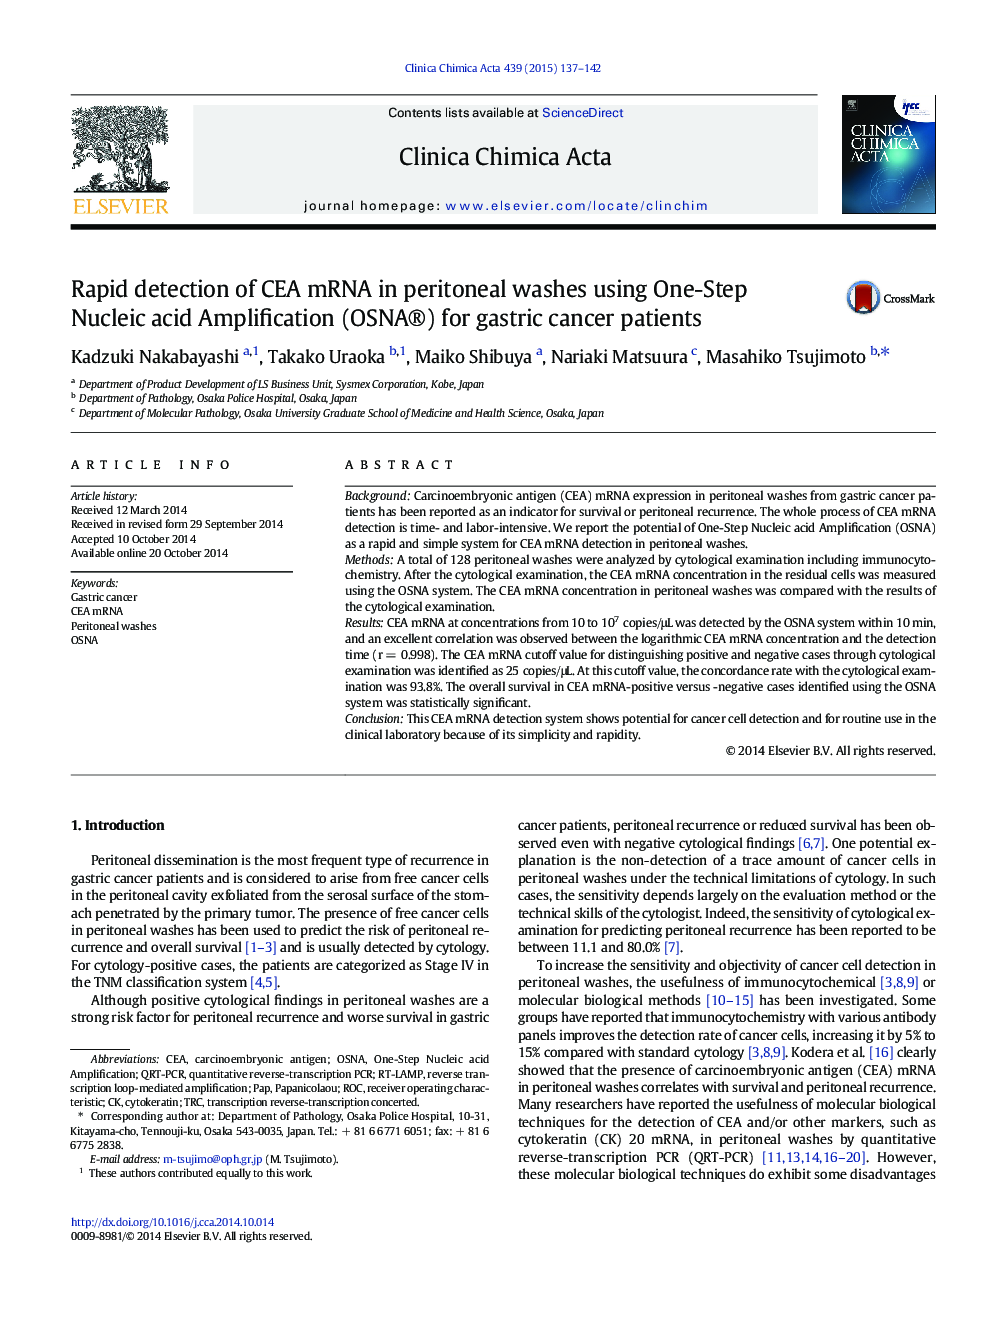 Rapid detection of CEA mRNA in peritoneal washes using One-Step Nucleic acid Amplification (OSNA®) for gastric cancer patients